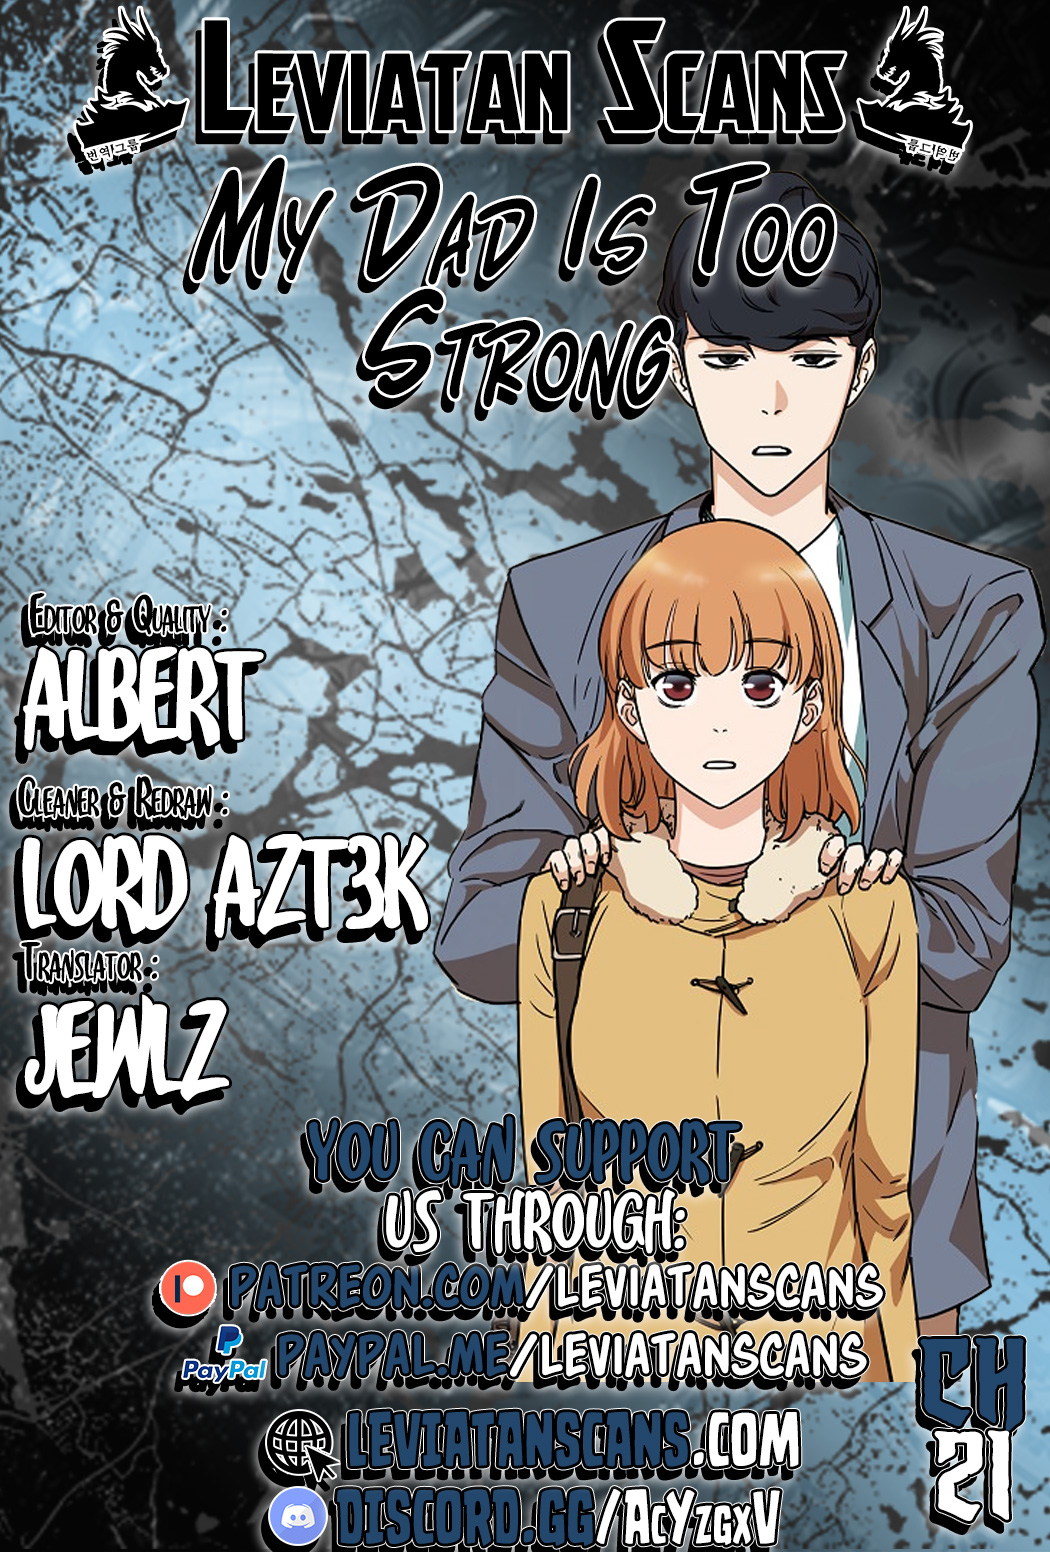 My Dad is Too Strong - Chapter 2600 - Image 1